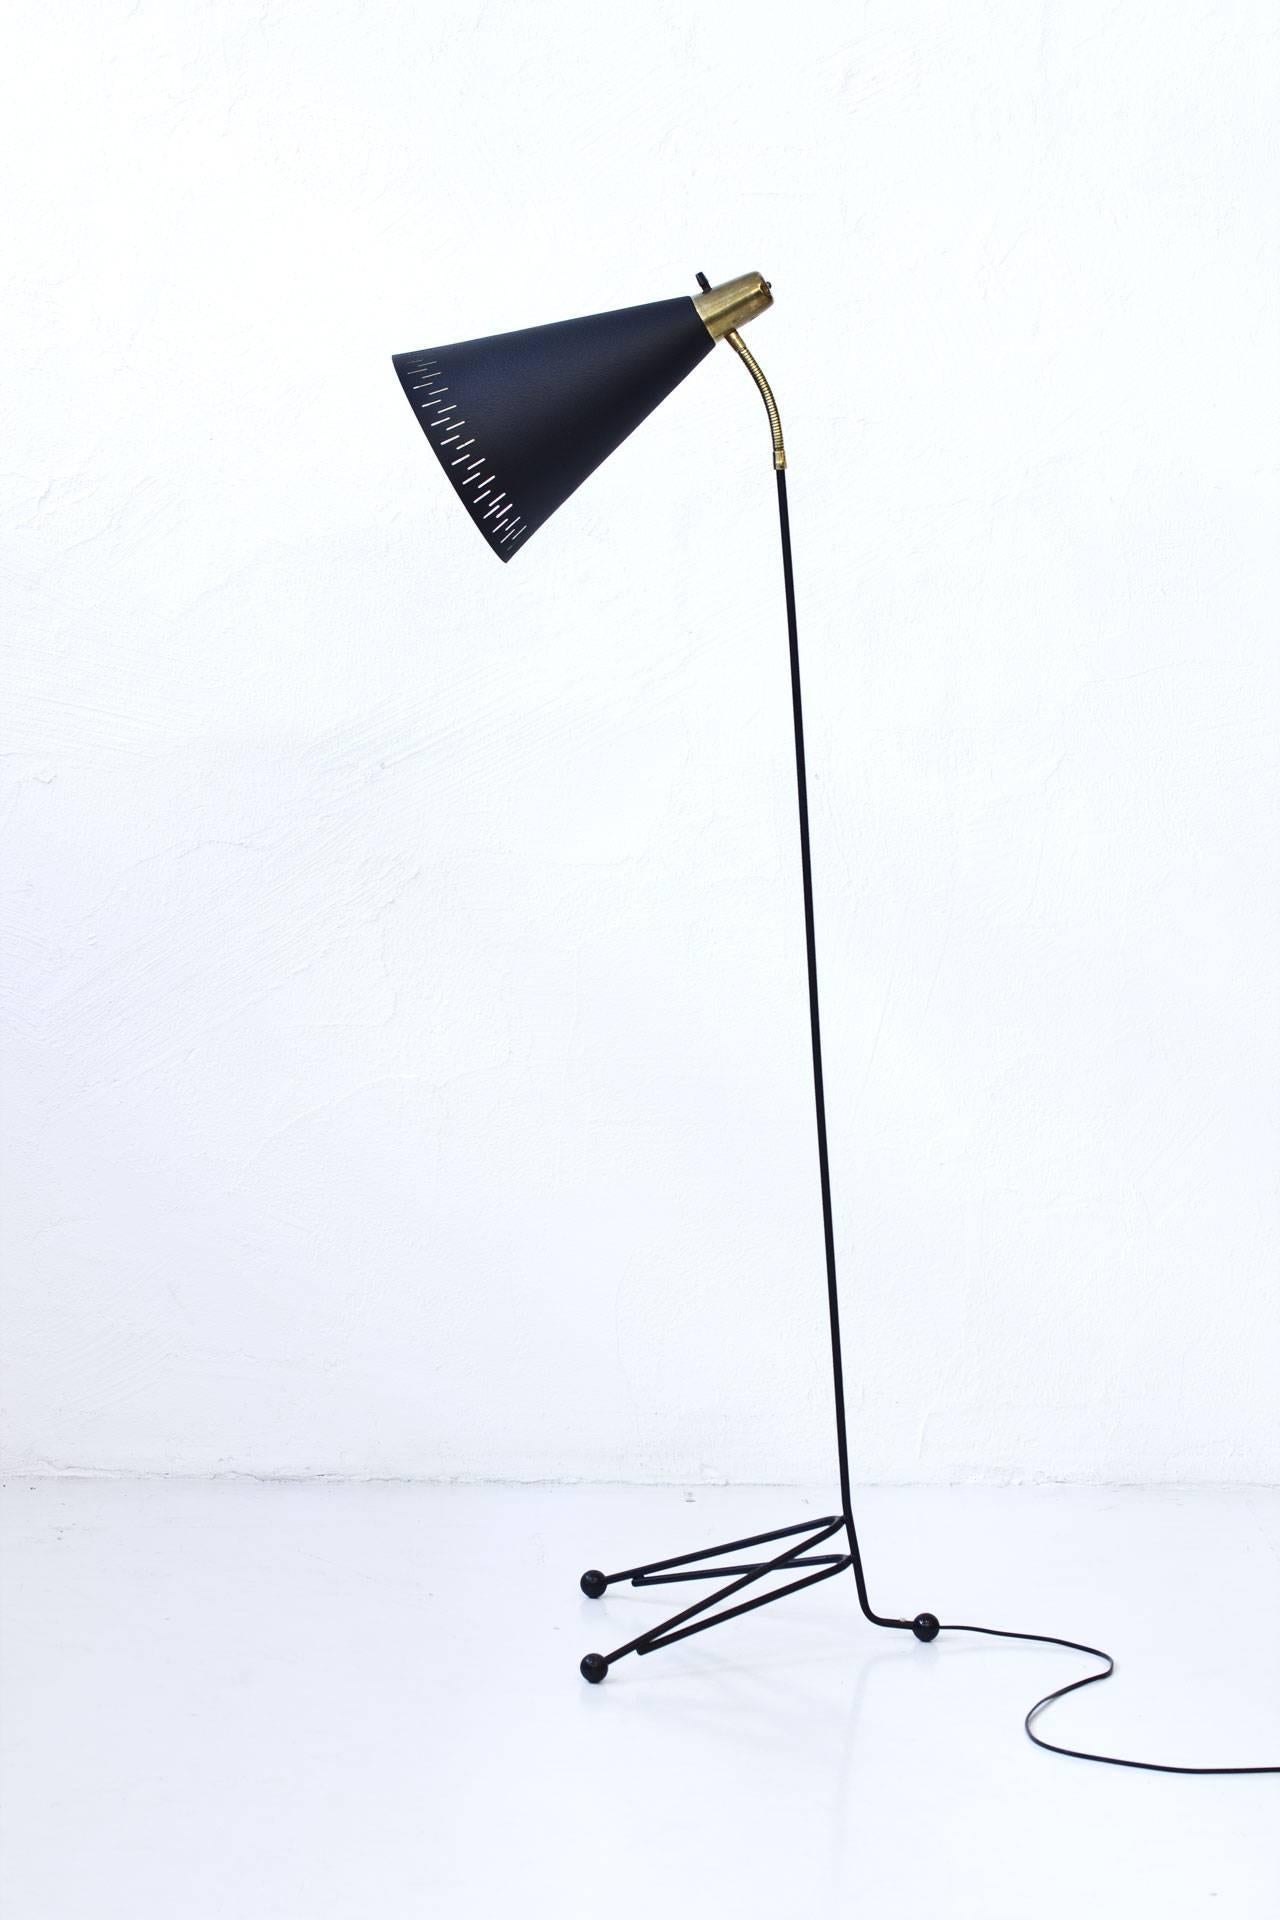 Swedish floor lamp, marked EAE produced during the 1950s. Metal stem, aluminum shade in black lacquer finish. Adjustable reflector with flexible arm in brass. Light switch on top in working condition.